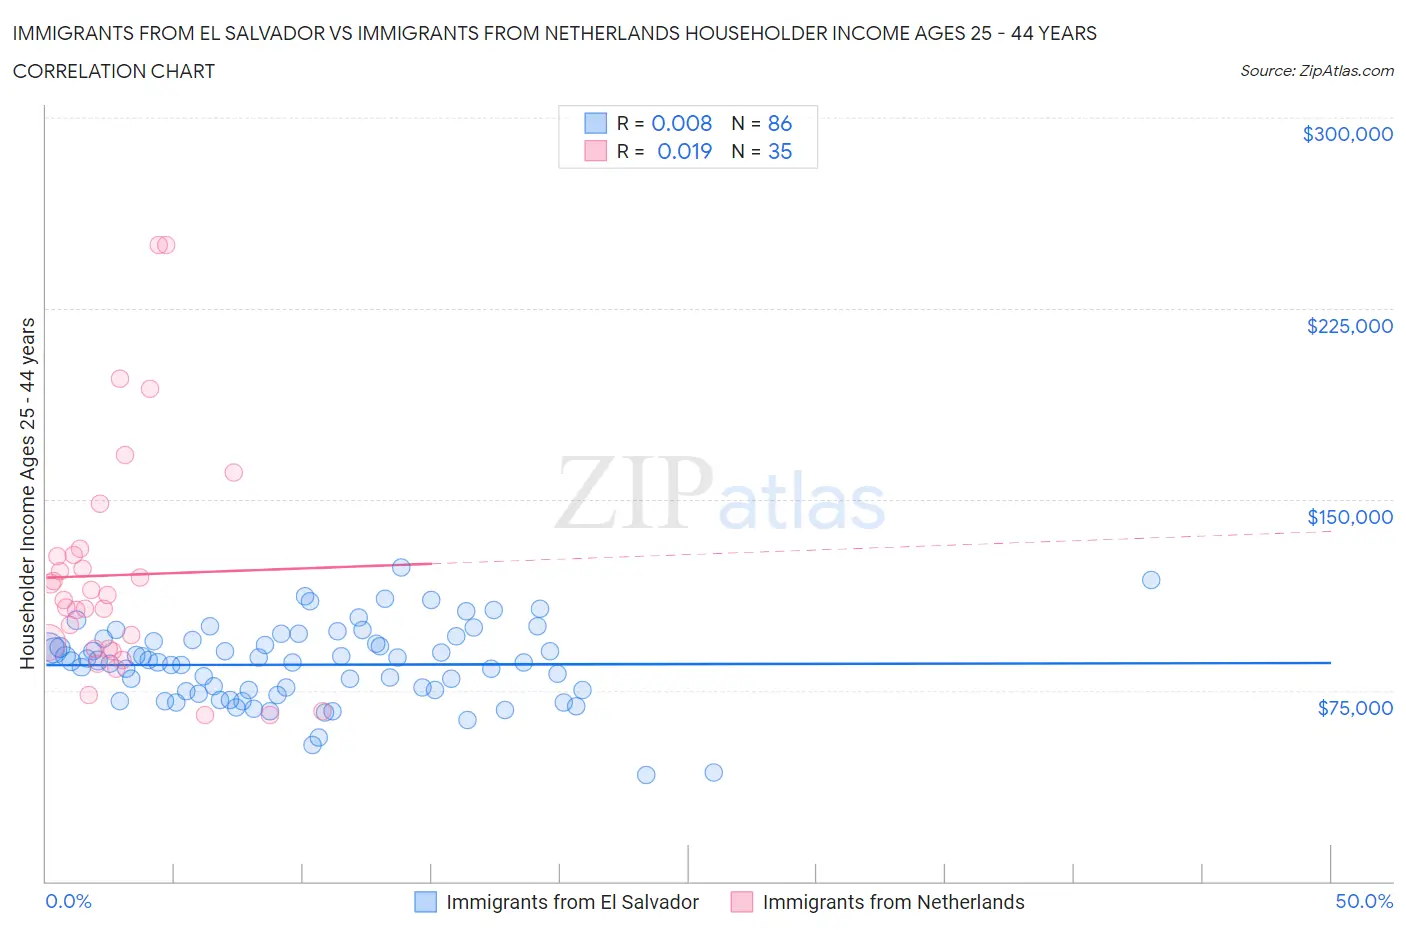 Immigrants from El Salvador vs Immigrants from Netherlands Householder Income Ages 25 - 44 years